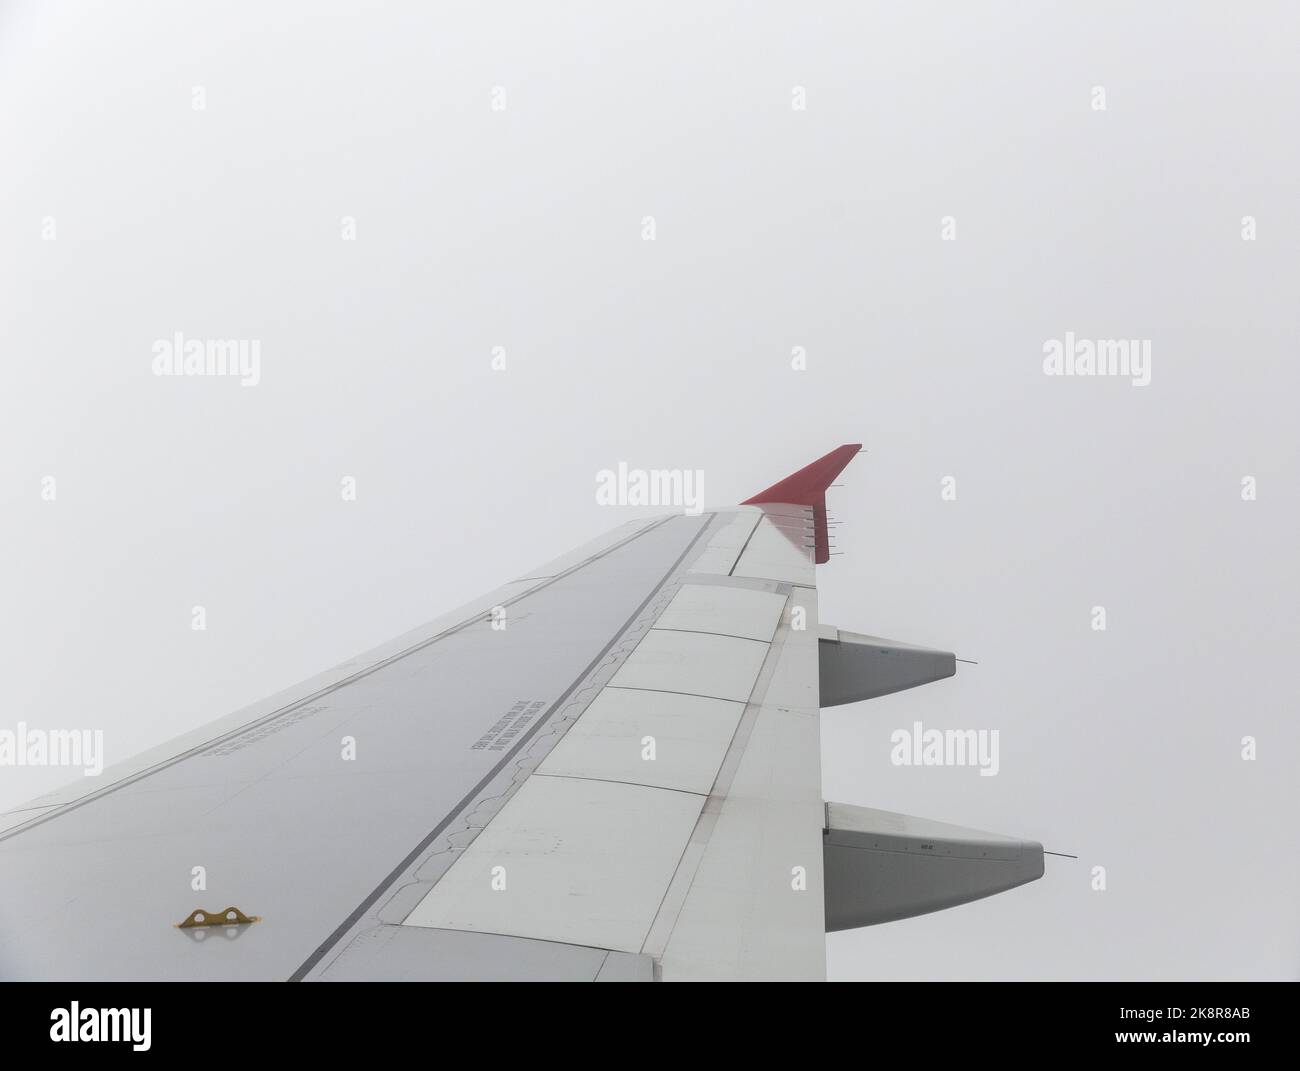 Airbus 320 wing during flight Stock Photo